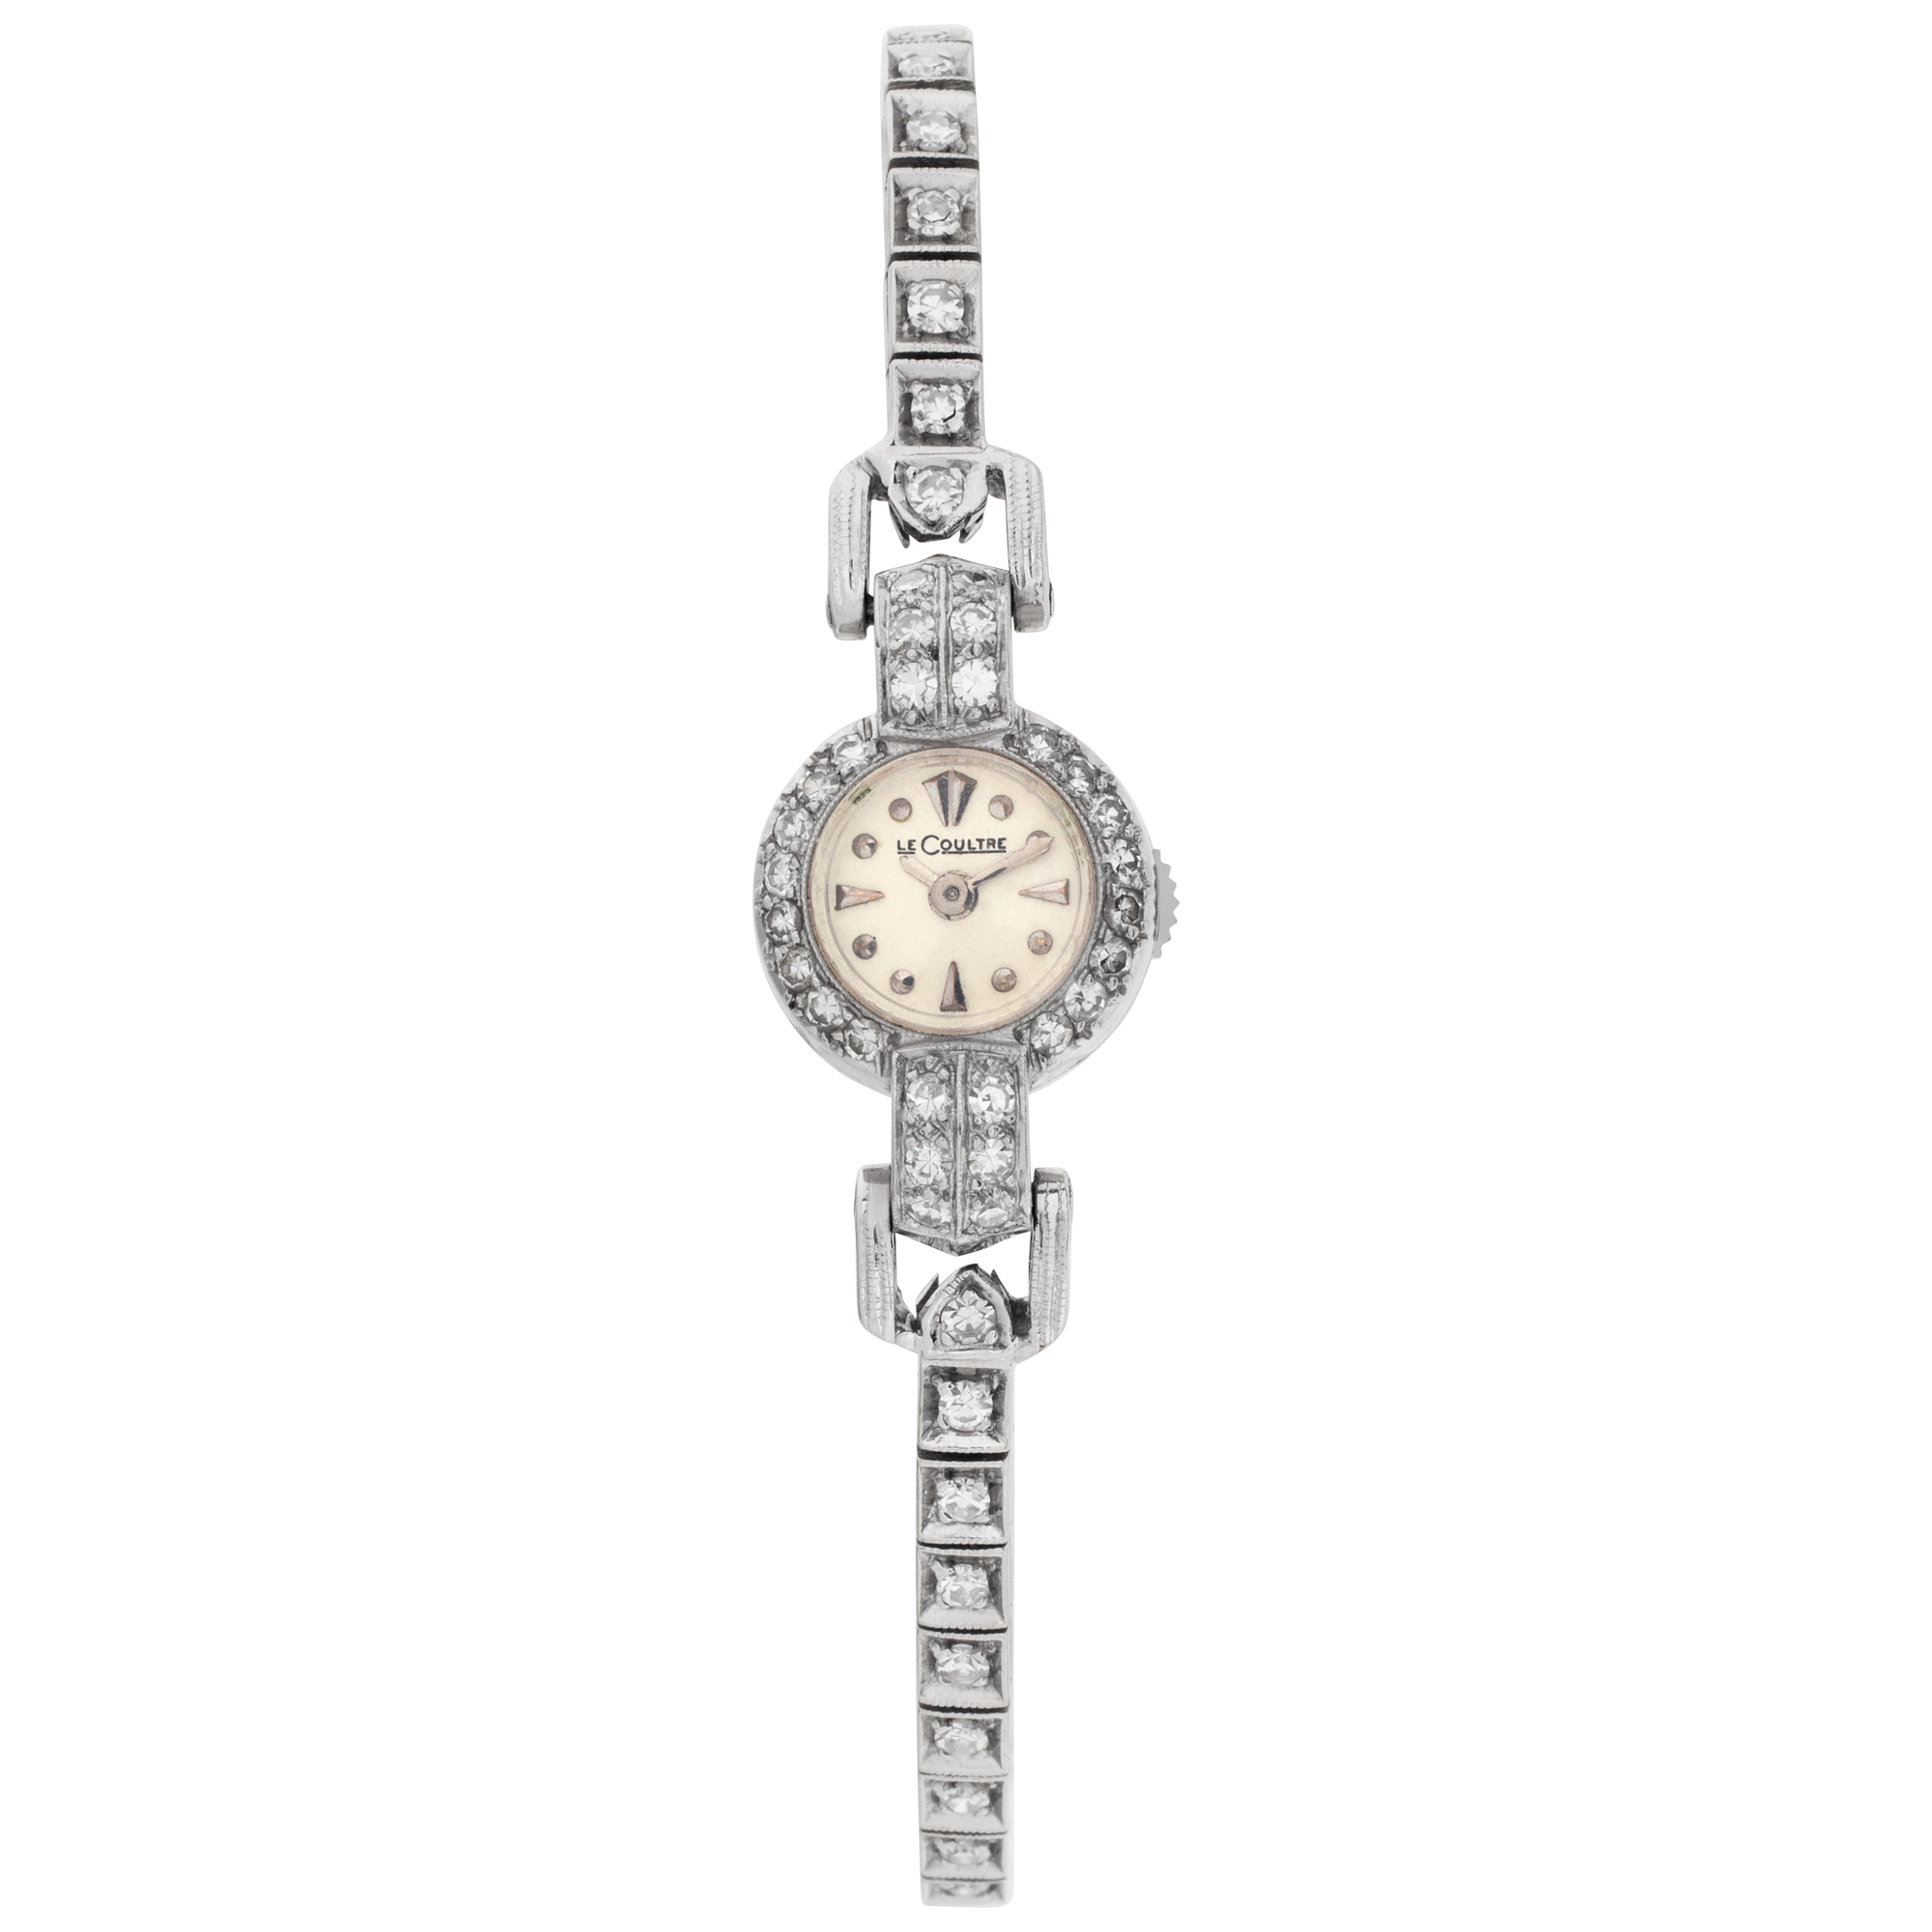 Used Vintage Watches - Certified Pre-Owned | Gray & Sons Jewelers 